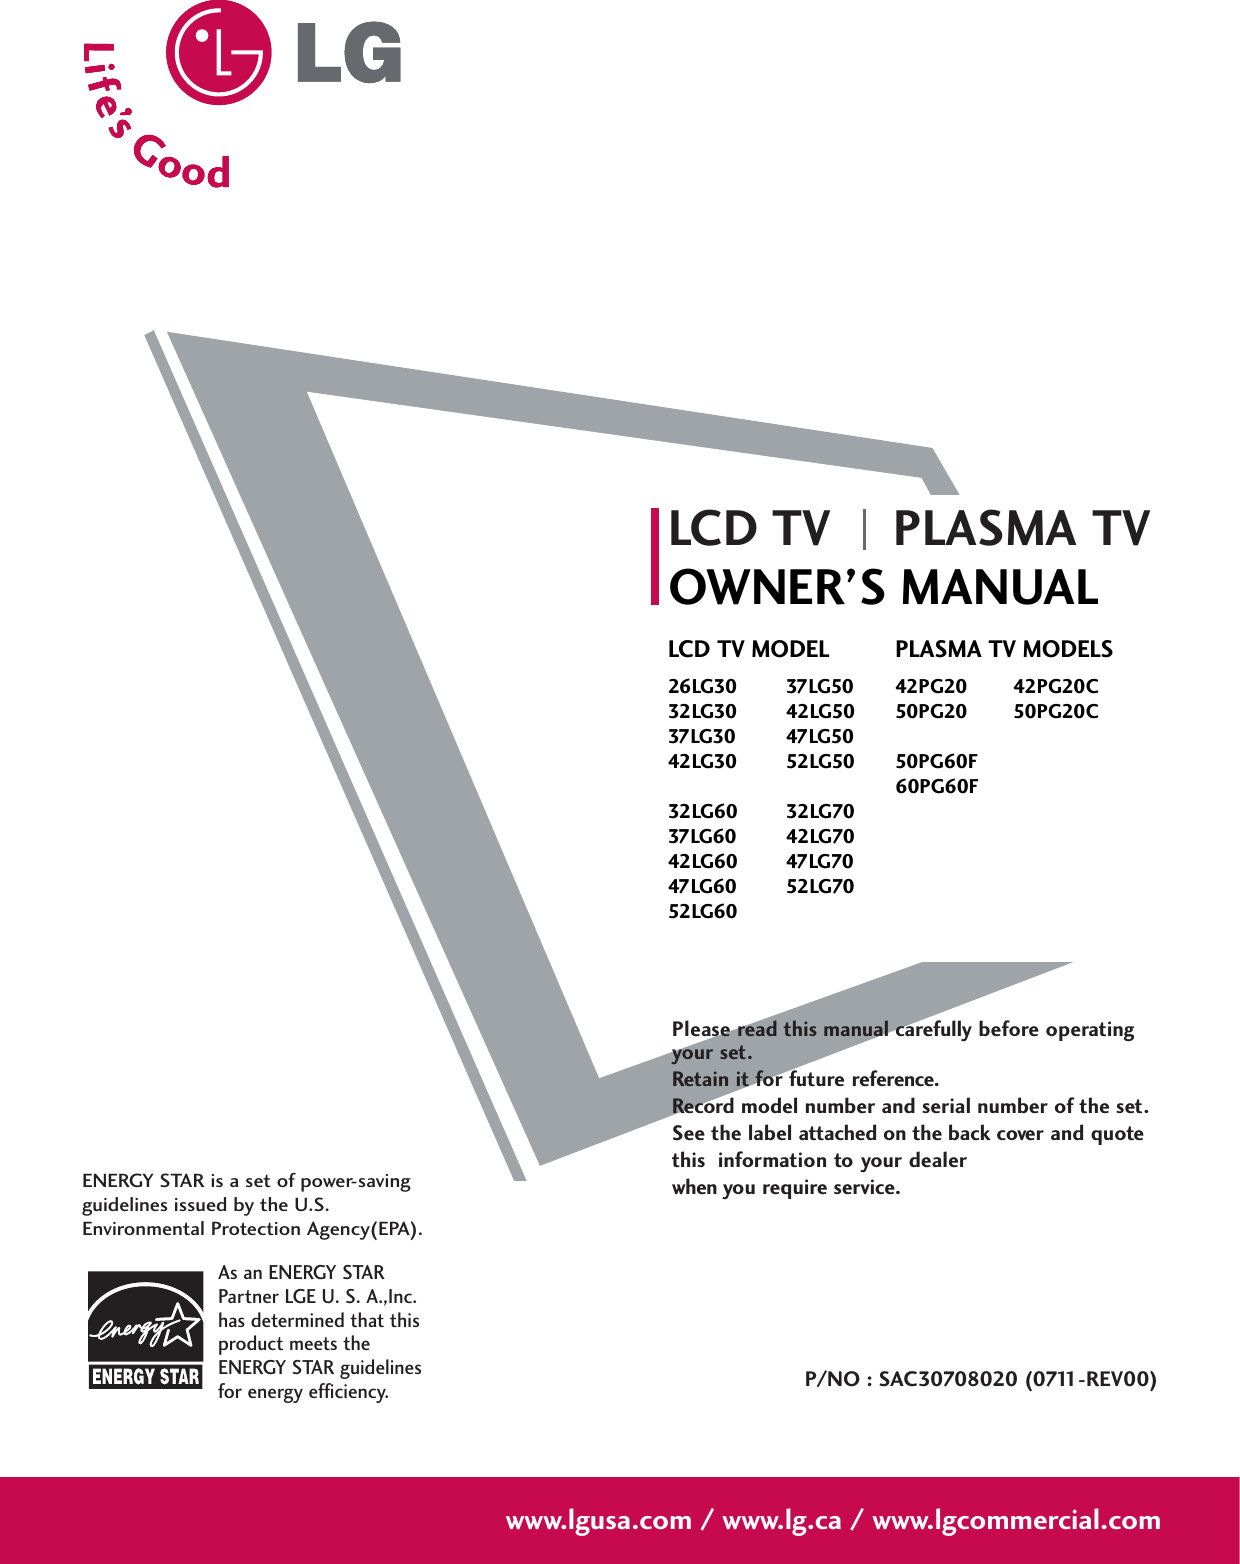 Please read this manual carefully before operatingyour set. Retain it for future reference.Record model number and serial number of the set. See the label attached on the back cover and quote this  information to your dealer when you require service.LCD TV PLASMA TVOWNER’S MANUALLCD TV MODEL26LG30 37LG5032LG30 42LG5037LG30 47LG5042LG30 52LG5032LG60 32LG7037LG60 42LG7042LG60 47LG7047LG60 52LG7052LG60PLASMA TV MODELS42PG20 42PG20C50PG20 50PG20C50PG60F60PG60FP/NO : SAC30708020 (0711-REV00)www.lgusa.com / www.lg.ca / www.lgcommercial.comAs an ENERGY STARPartner LGE U. S. A.,Inc.has determined that thisproduct meets theENERGY STAR guidelinesfor energy efficiency.ENERGY STAR is a set of power-savingguidelines issued by the U.S.Environmental Protection Agency(EPA).